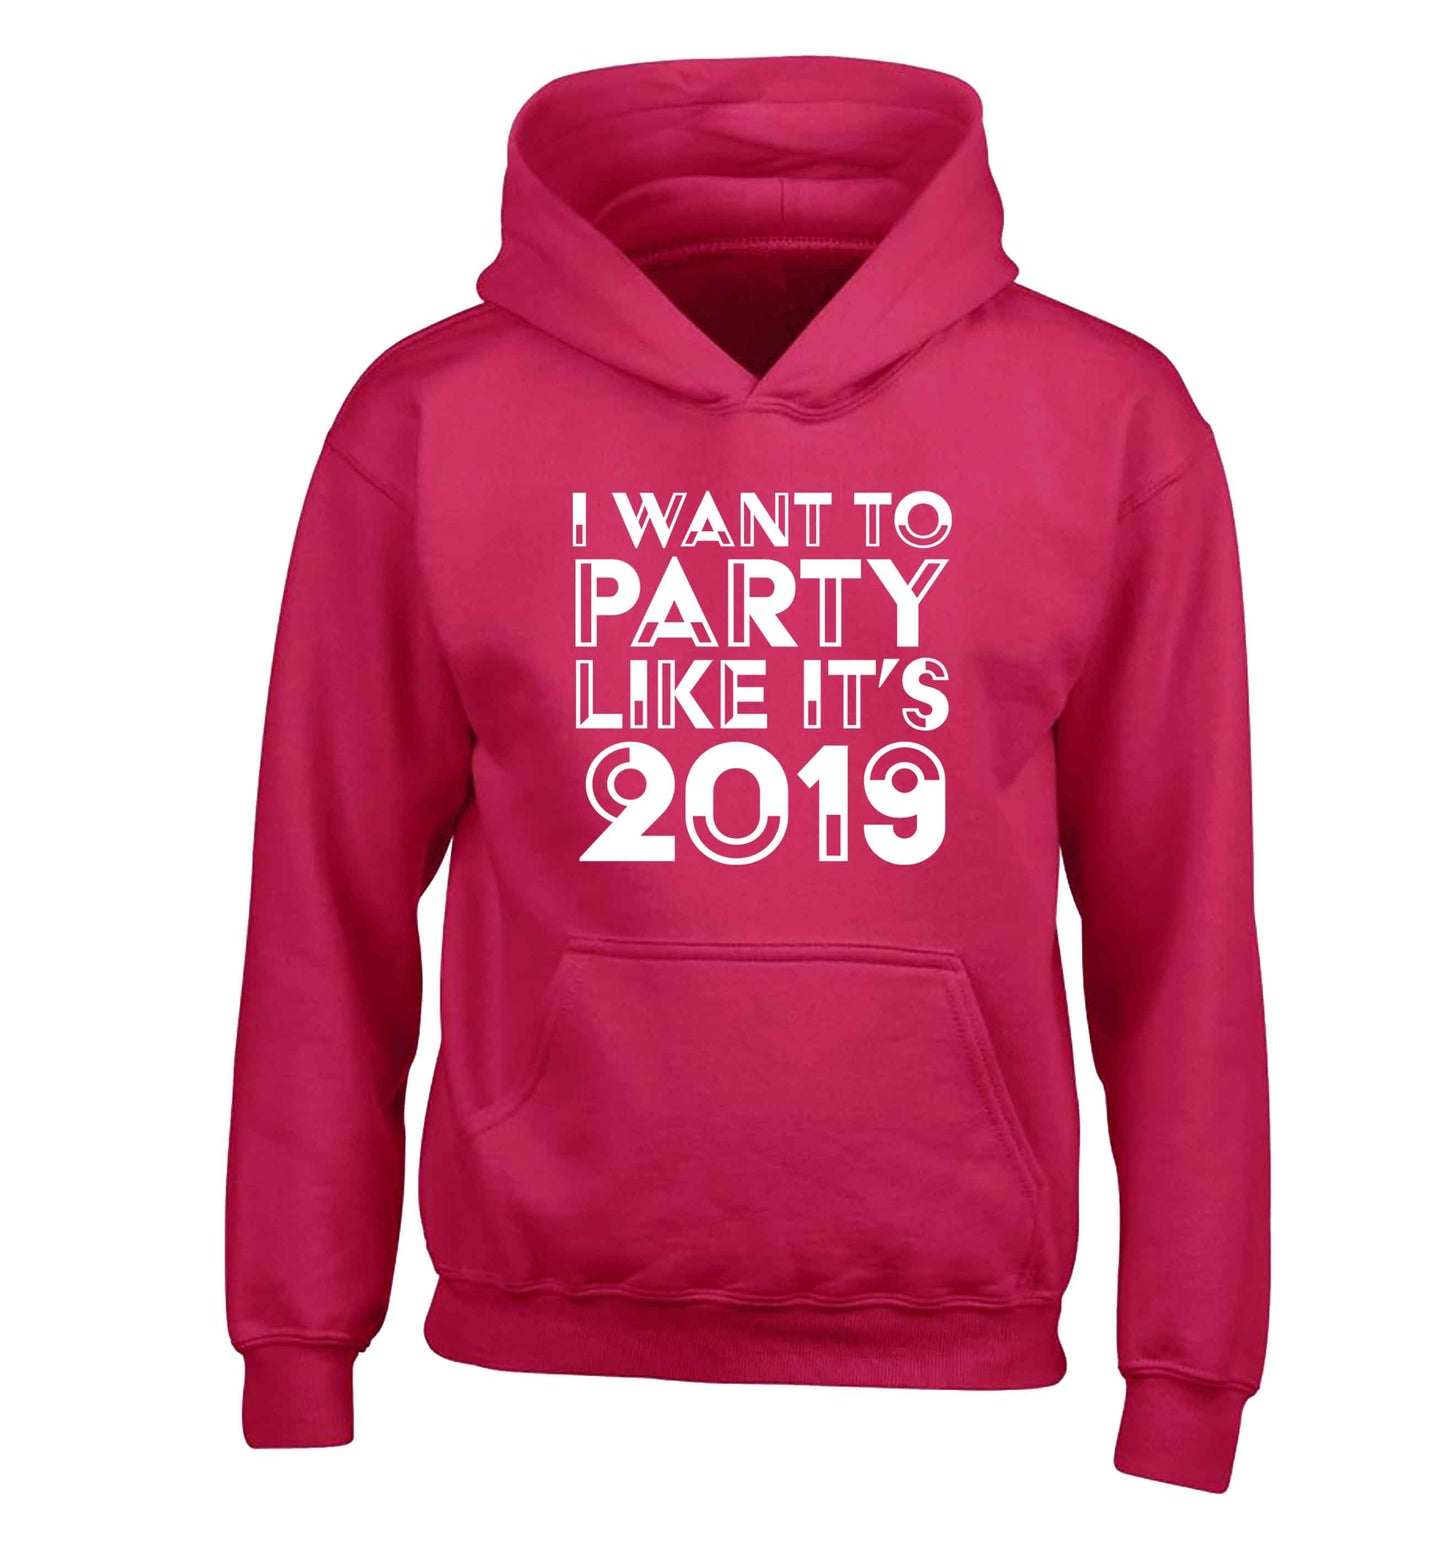 I want to party like it's 2019 children's pink hoodie 12-13 Years